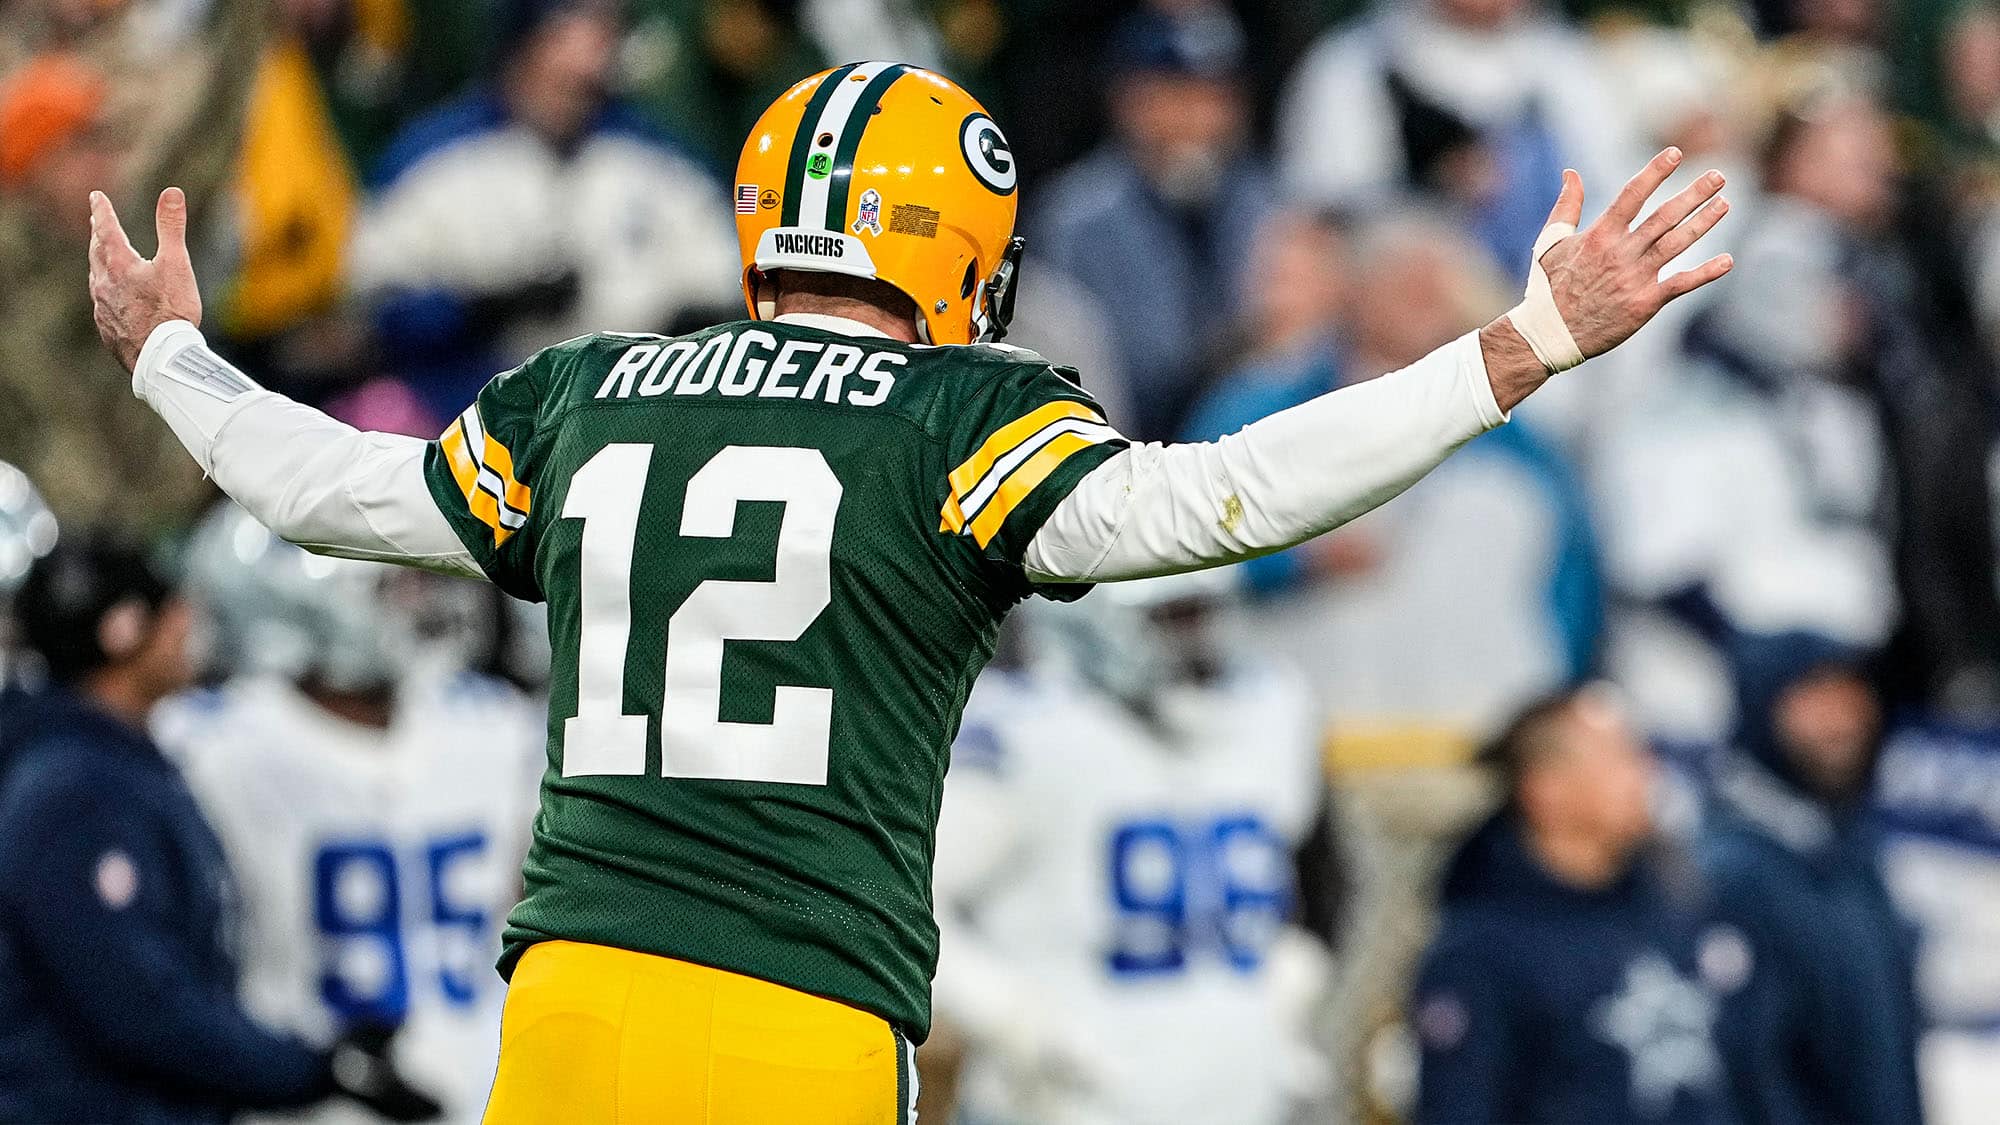 NFL Betting Odds, Spreads, Picks, Lines, 2022, Aaron Rodgers, Favorite, Titans, Packers